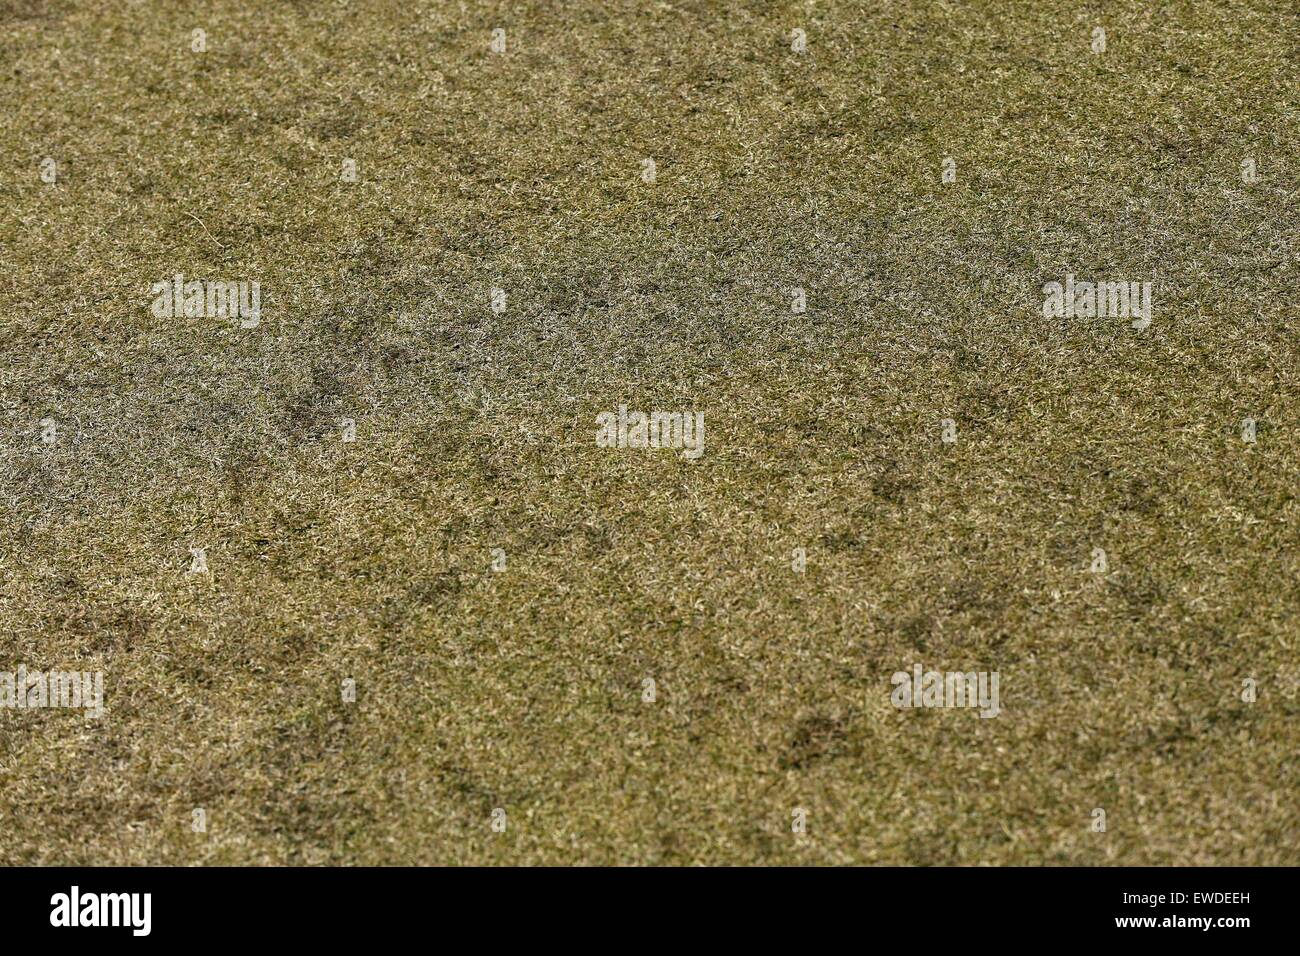 University Place, Washington, USA. 21st June, 2015. General view Golf : Detail shot of poa annua grass (interspersed with the fine fescue) during the final round of the 115th U.S. Open Championship at the Chambers Bay Golf Course in University Place, Washington, United States . © Koji Aoki/AFLO SPORT/Alamy Live News Stock Photo